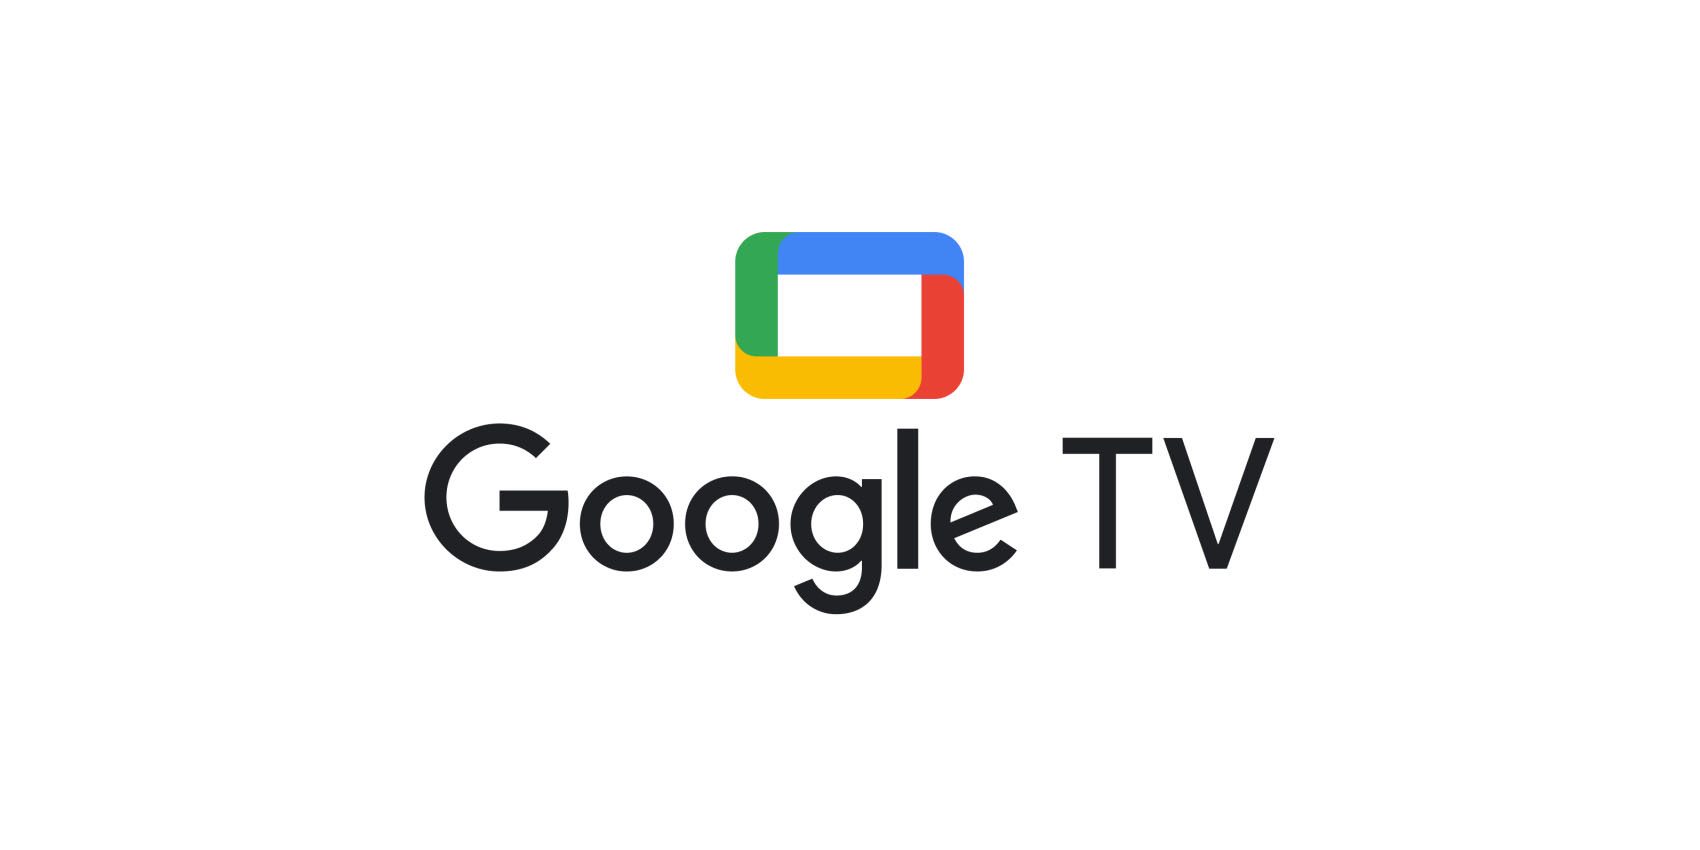 Google TV application, Chromecast now supports NBC Peacock, just in time for ‘The Office’ change